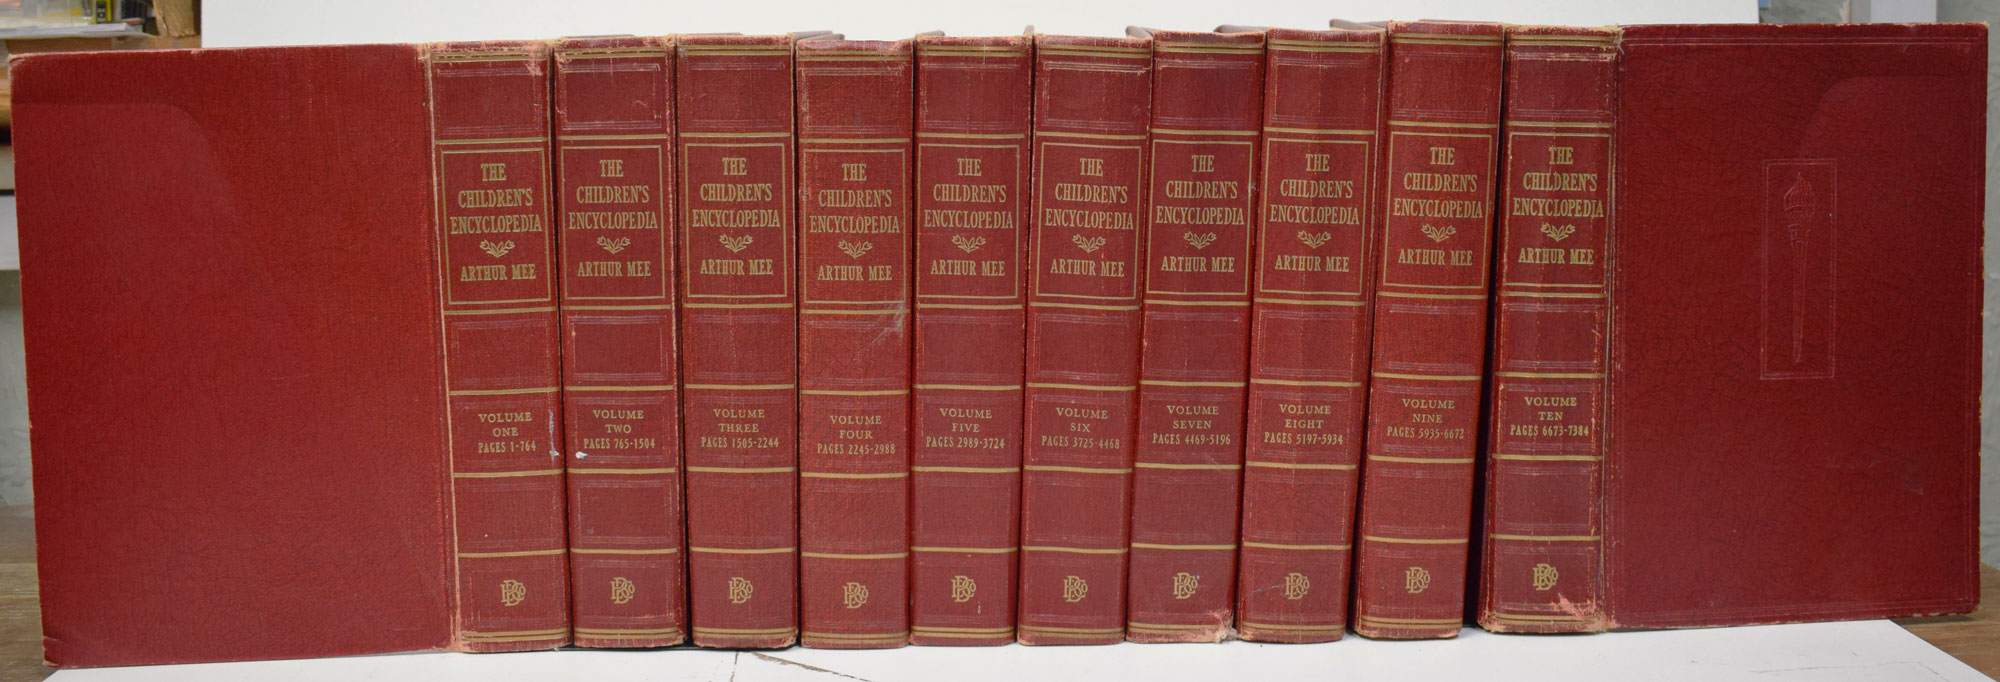 The Children's Encyclopedia. 10 volume set. Red cloth edition.